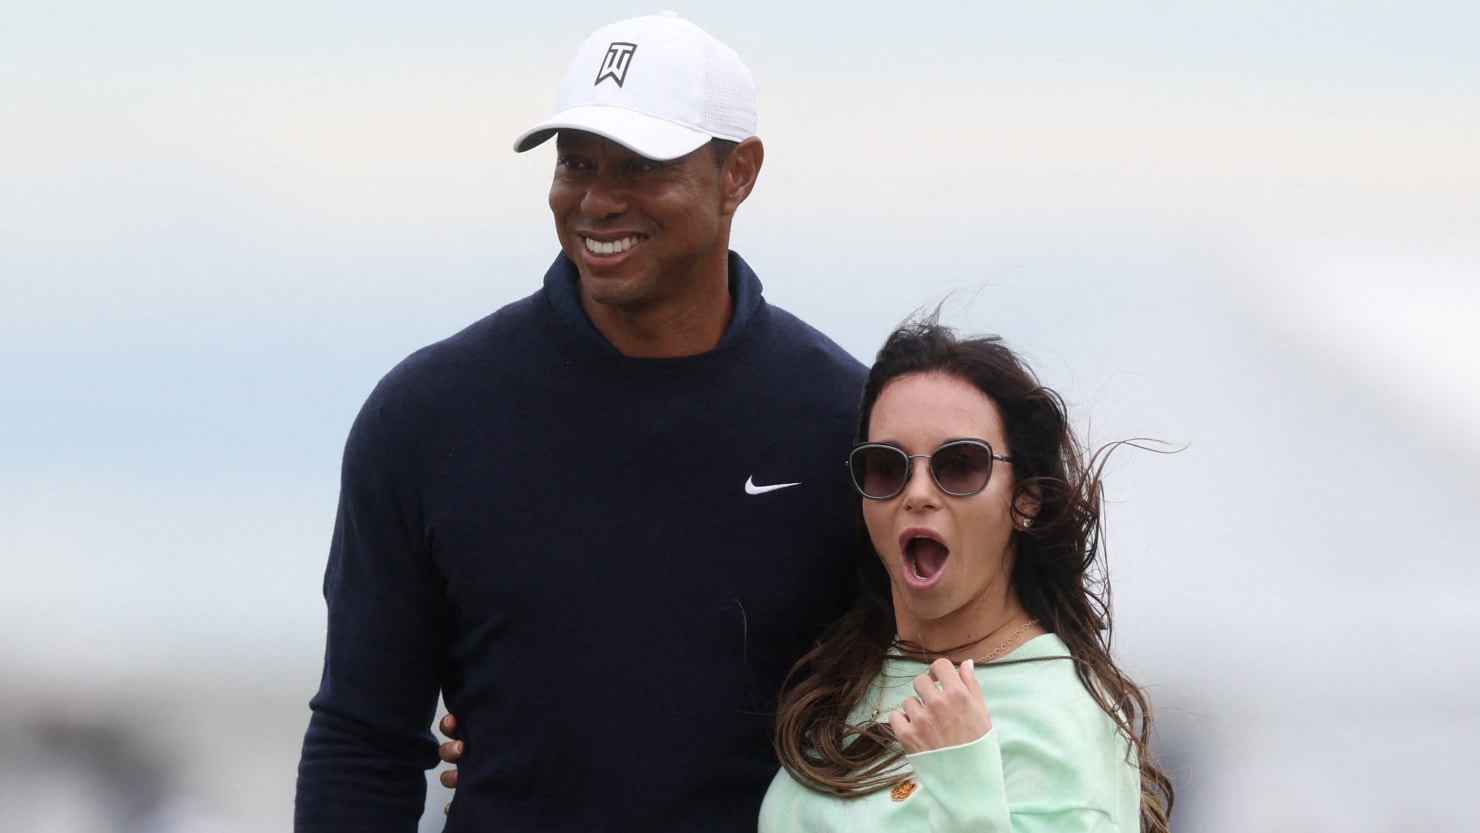 Tiger Woods’ ex-girlfriend sued after she was evicted from his Florida mansion